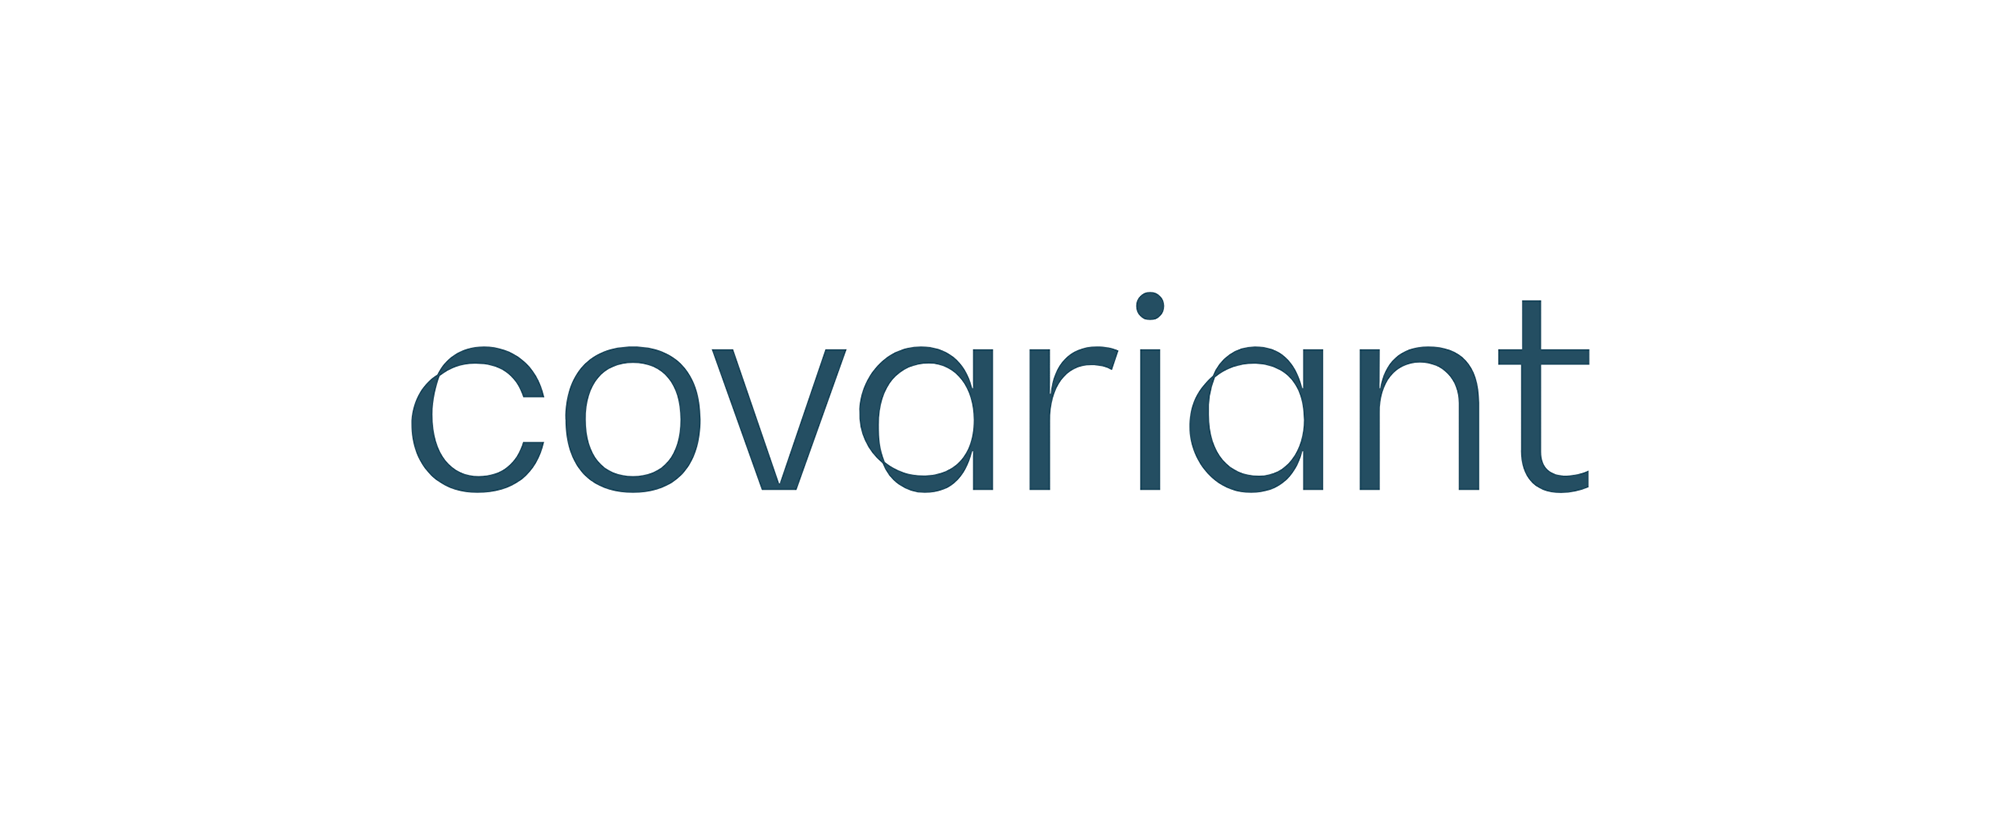 New Logo and Identity for Covariant by Pentagram